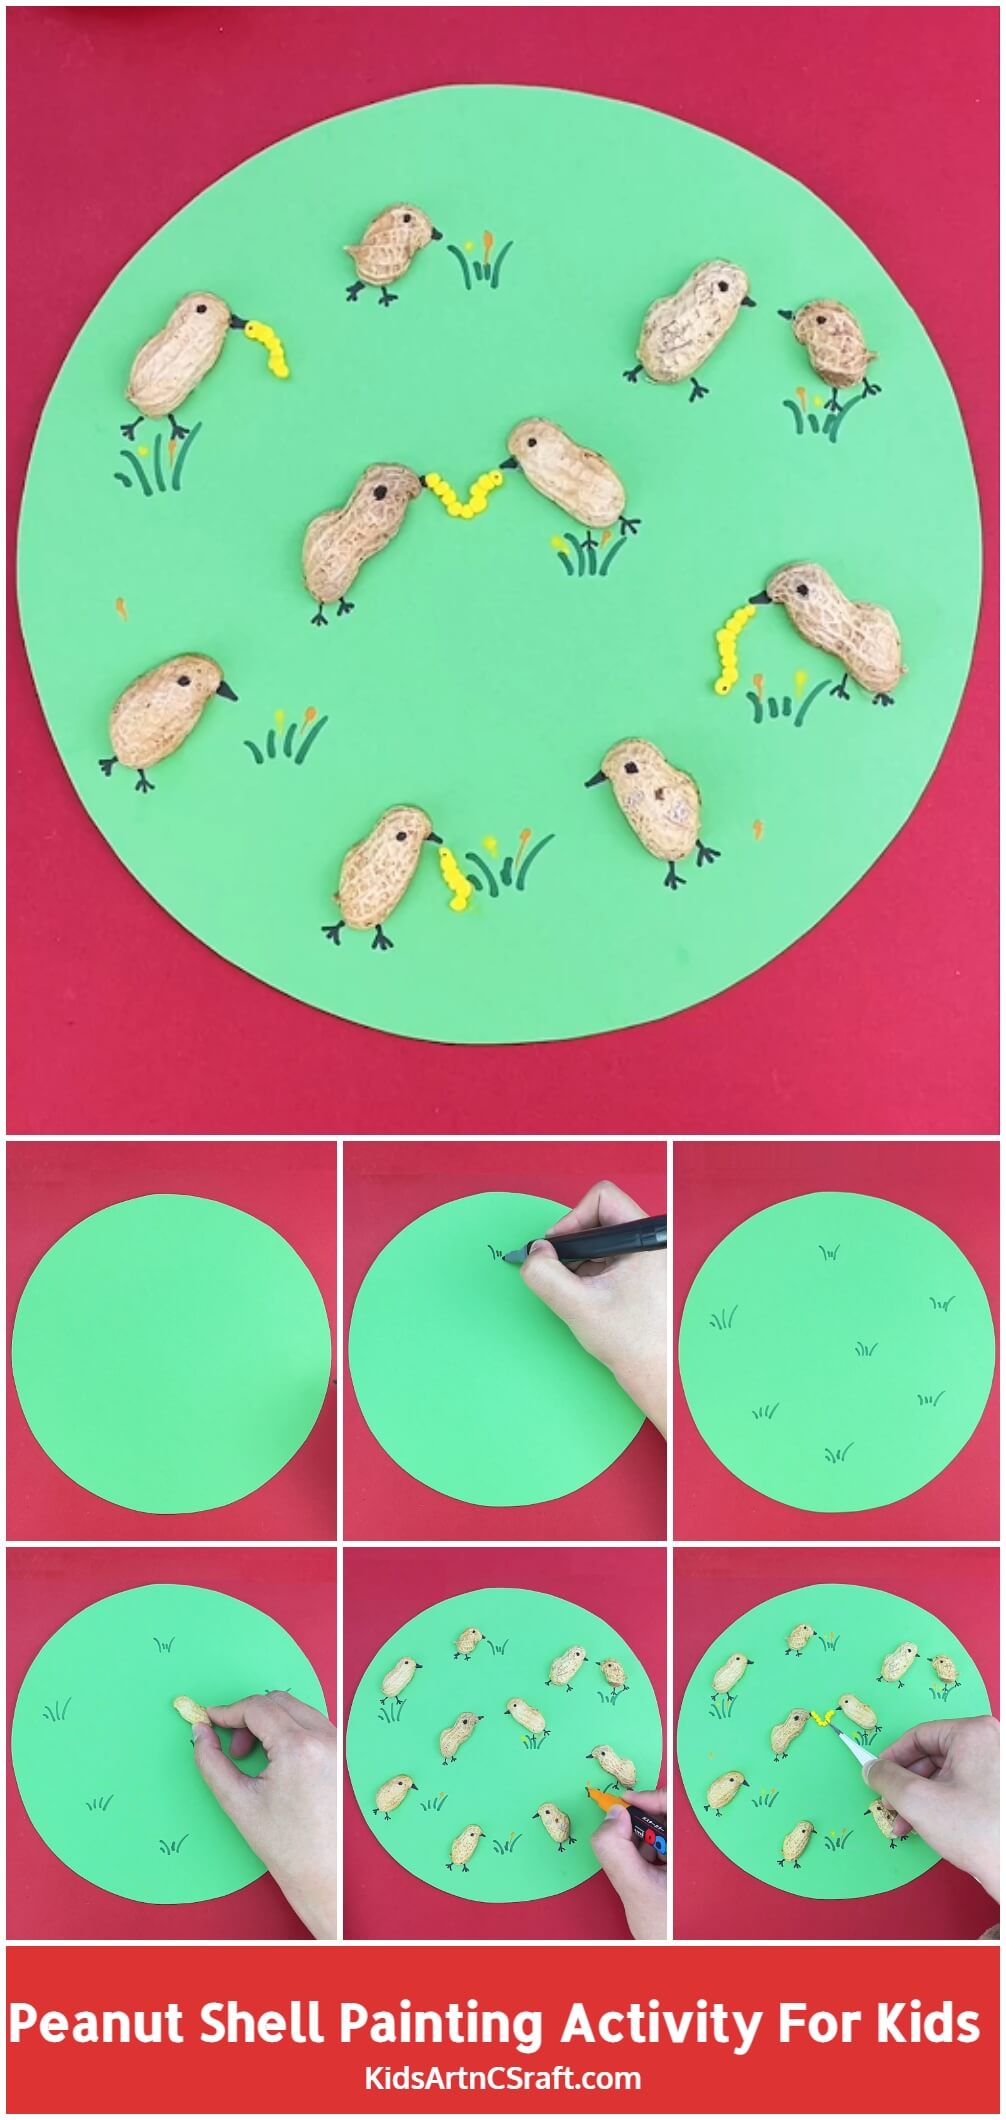 Peanut Shell Painting Activity for Kids - Step by Step Tutorial